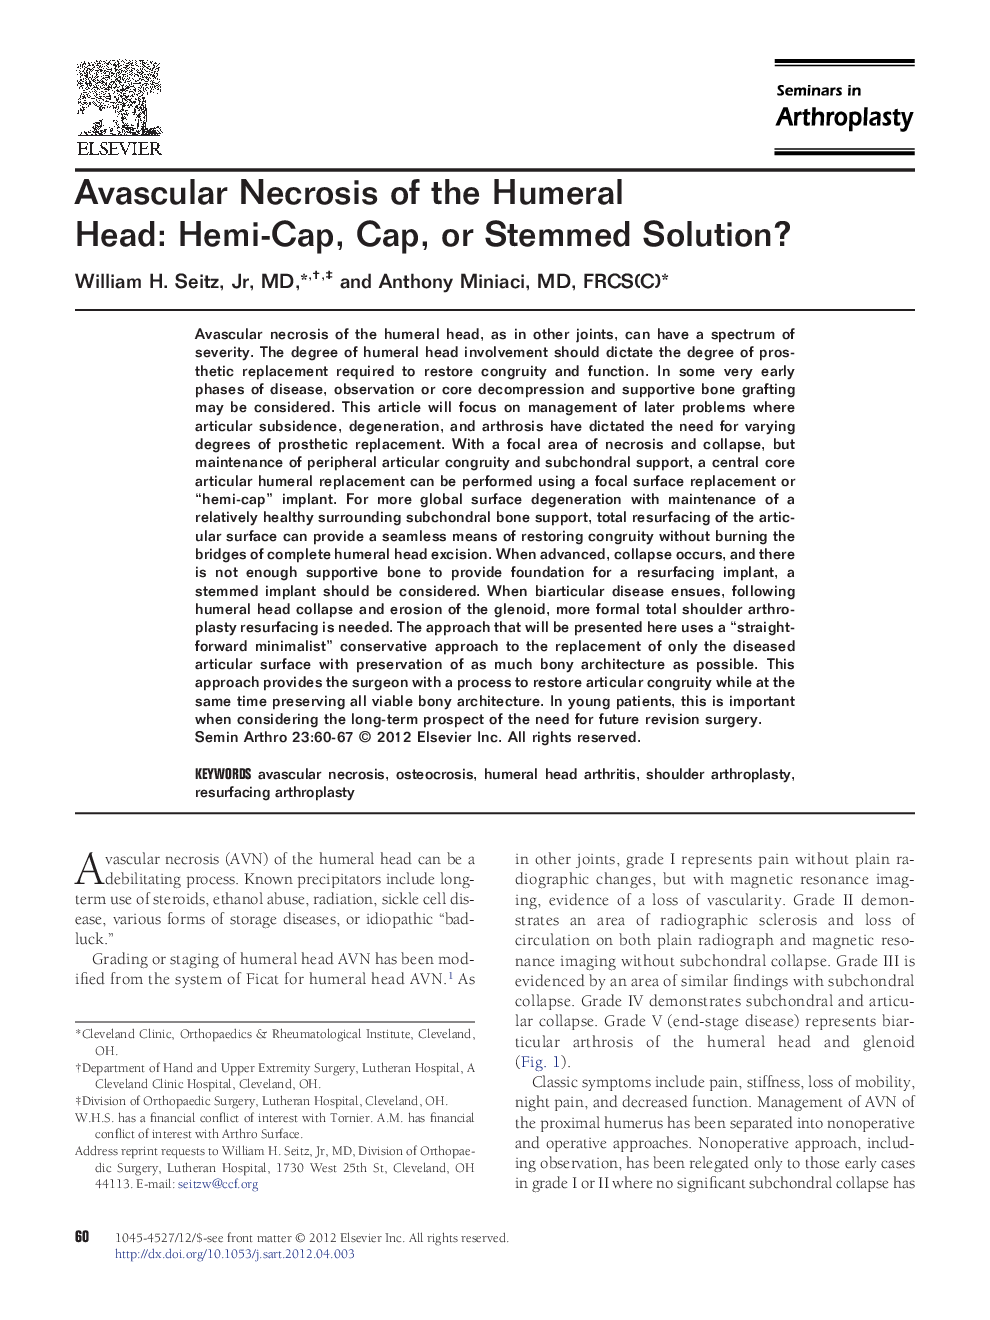 Avascular Necrosis of the Humeral Head: Hemi-Cap, Cap, or Stemmed Solution? 